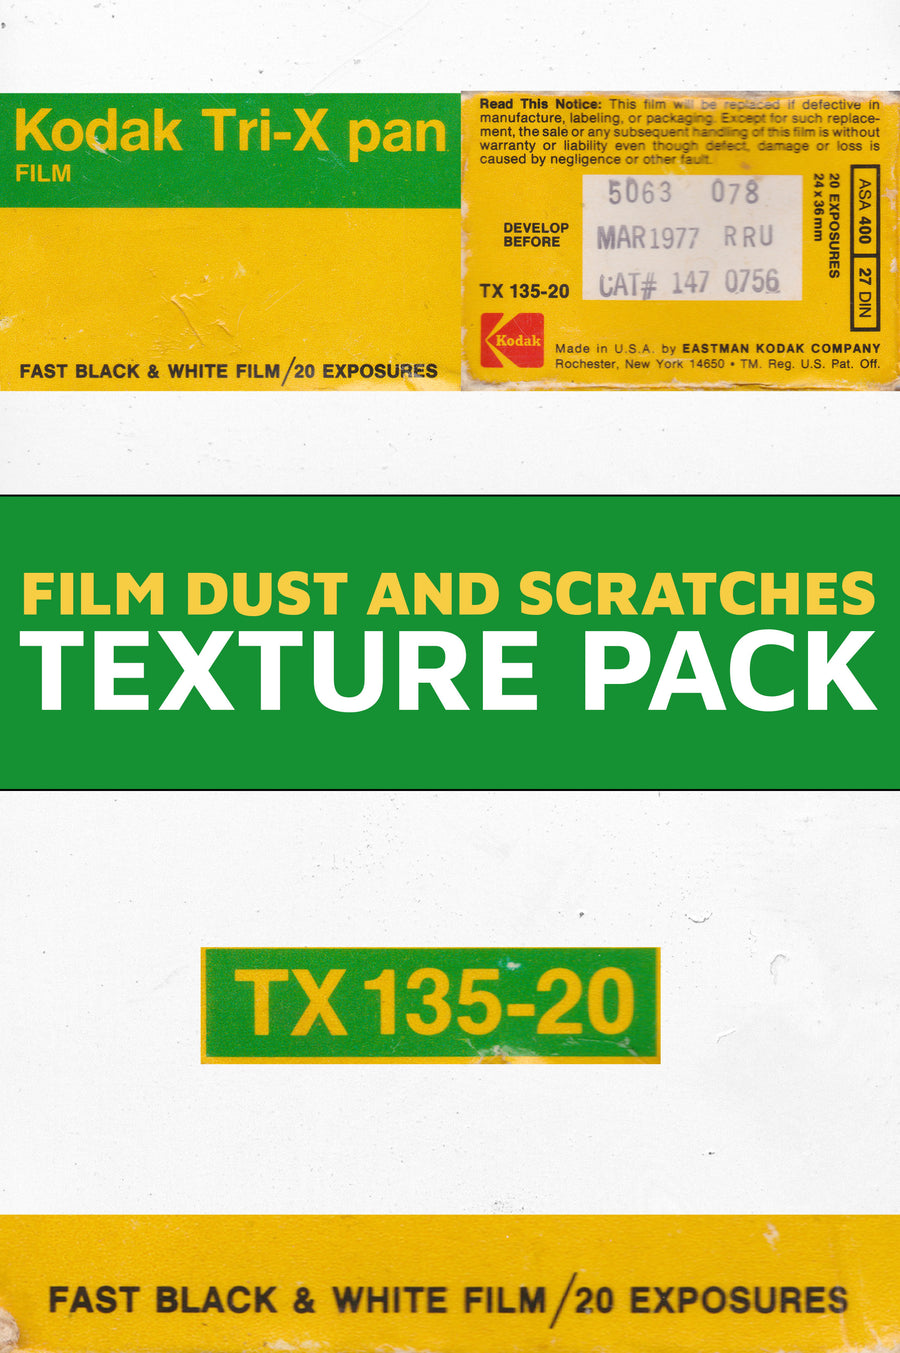 FILM DUST AND SCRATCHES TEXTURE PACK